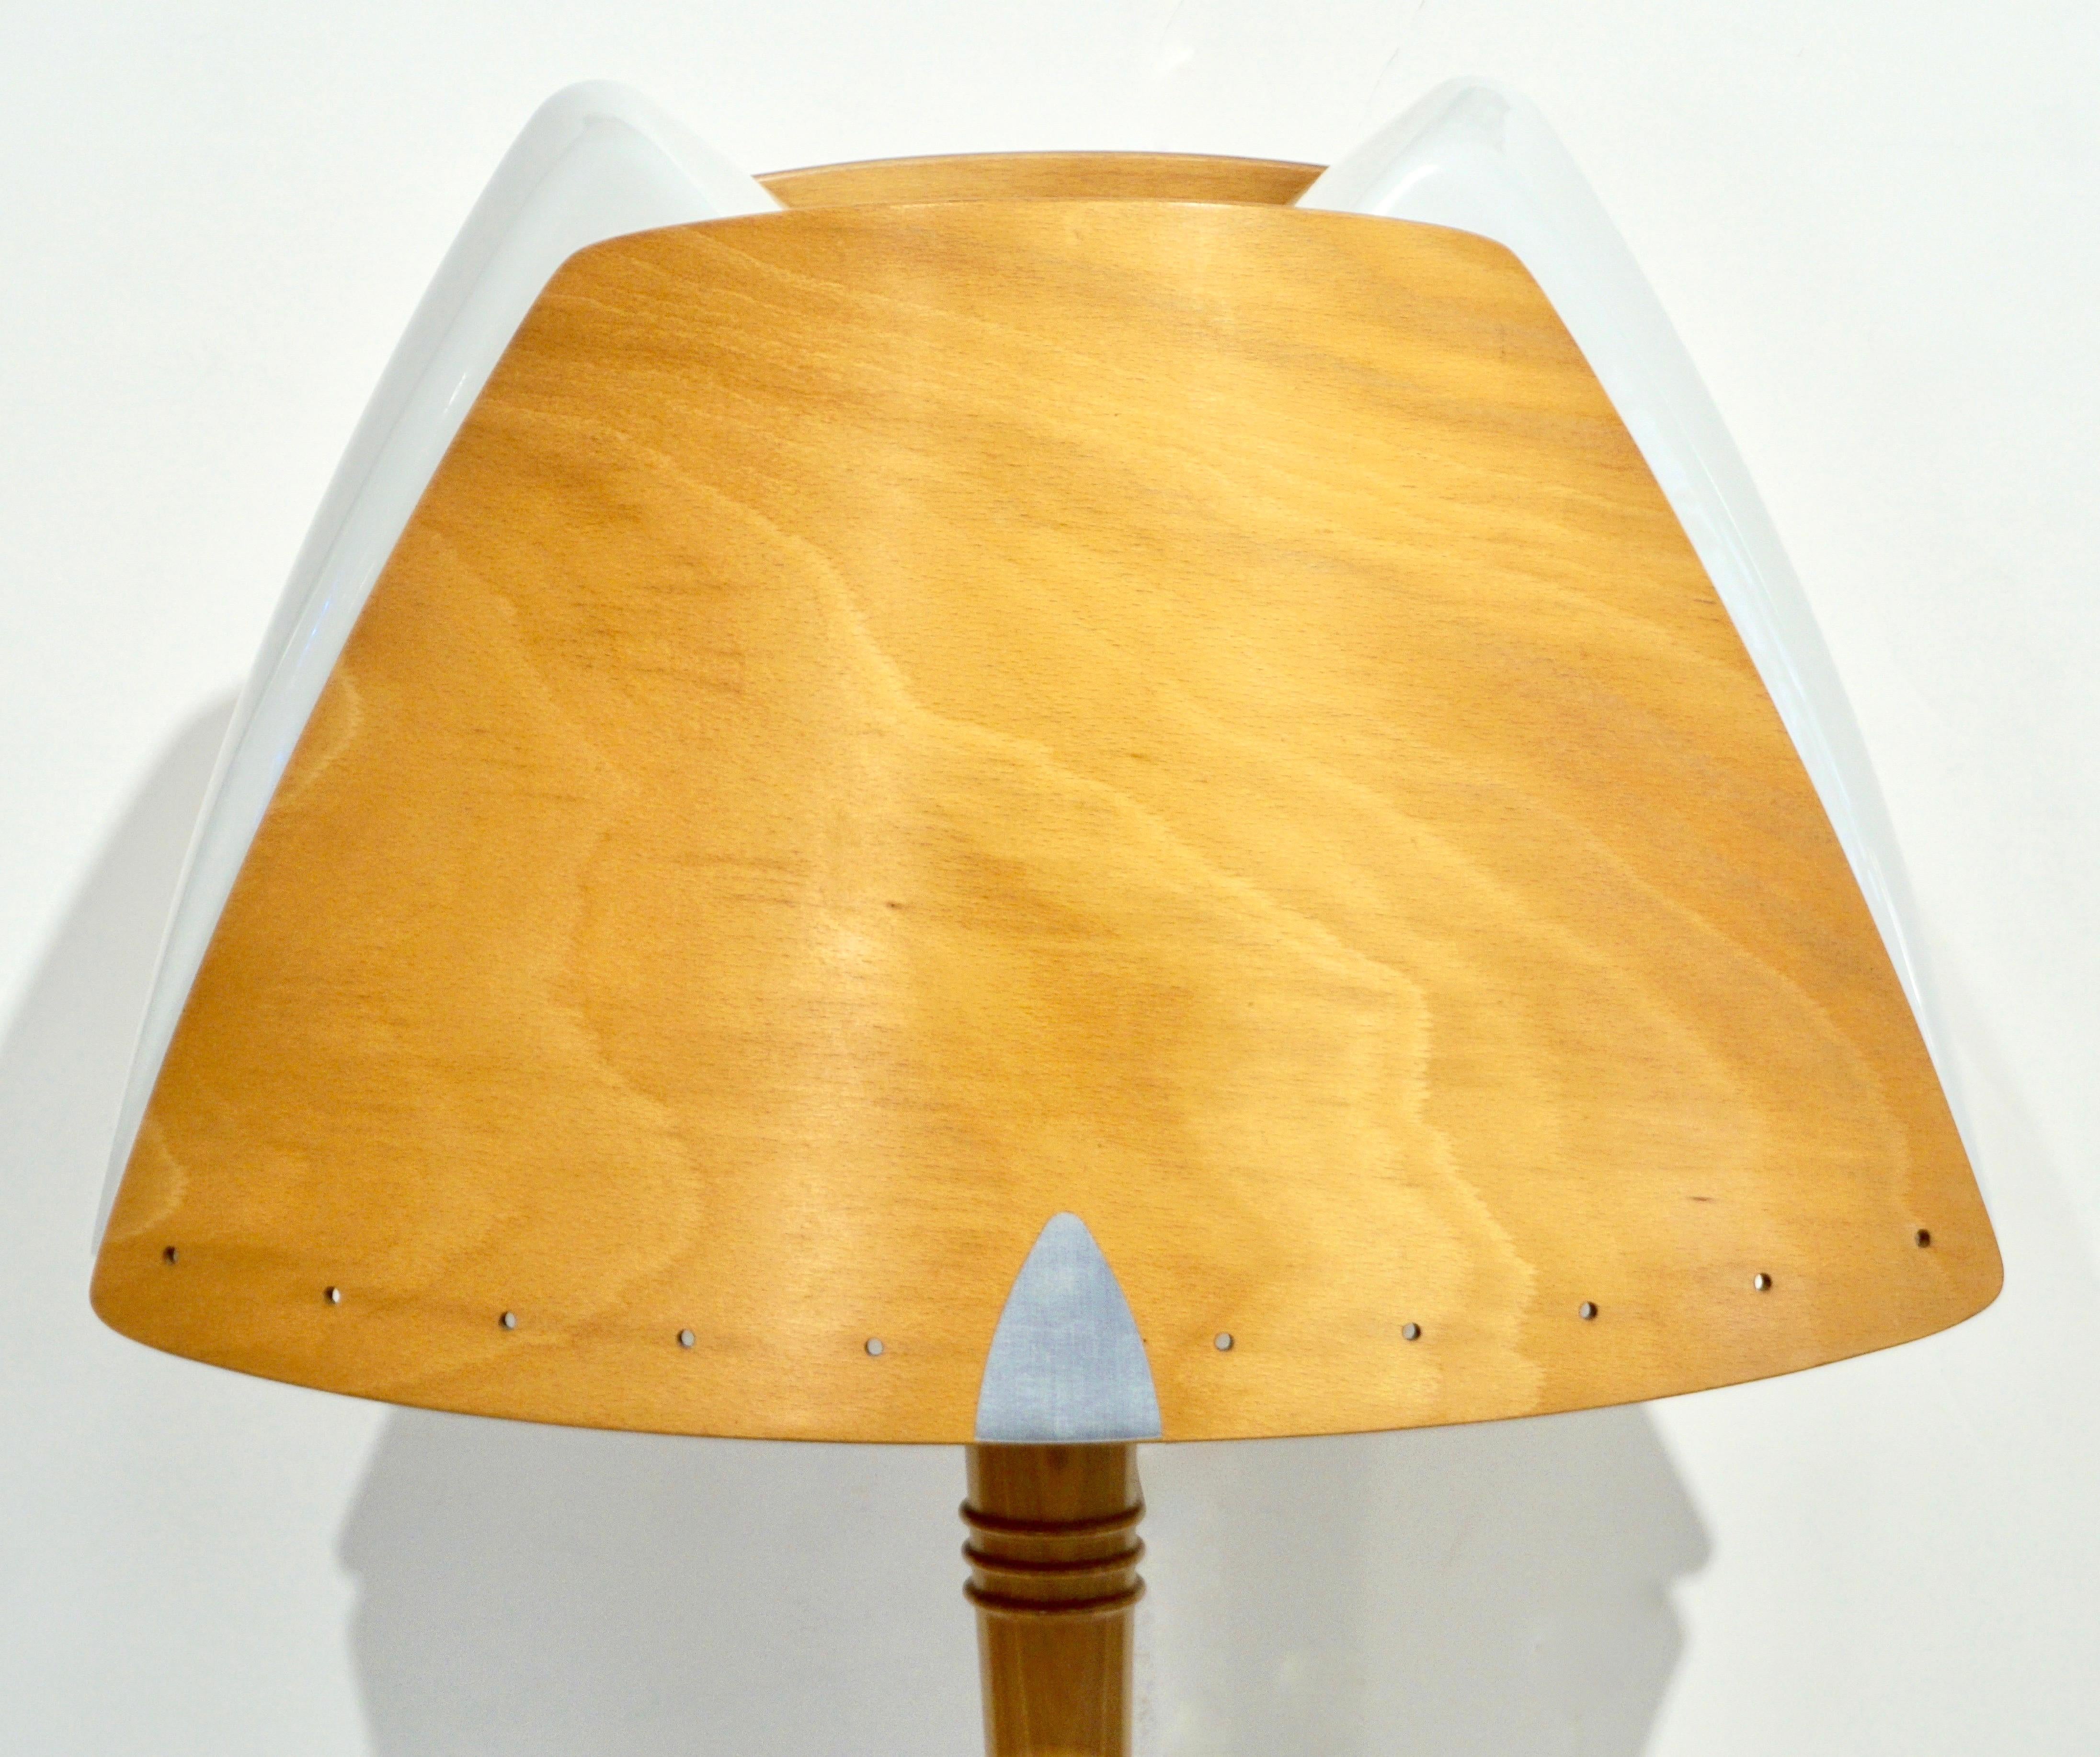 1970 French Vintage Birch Wood and Acrylic Table Lamp for Barcelona Hilton Hotel For Sale 5